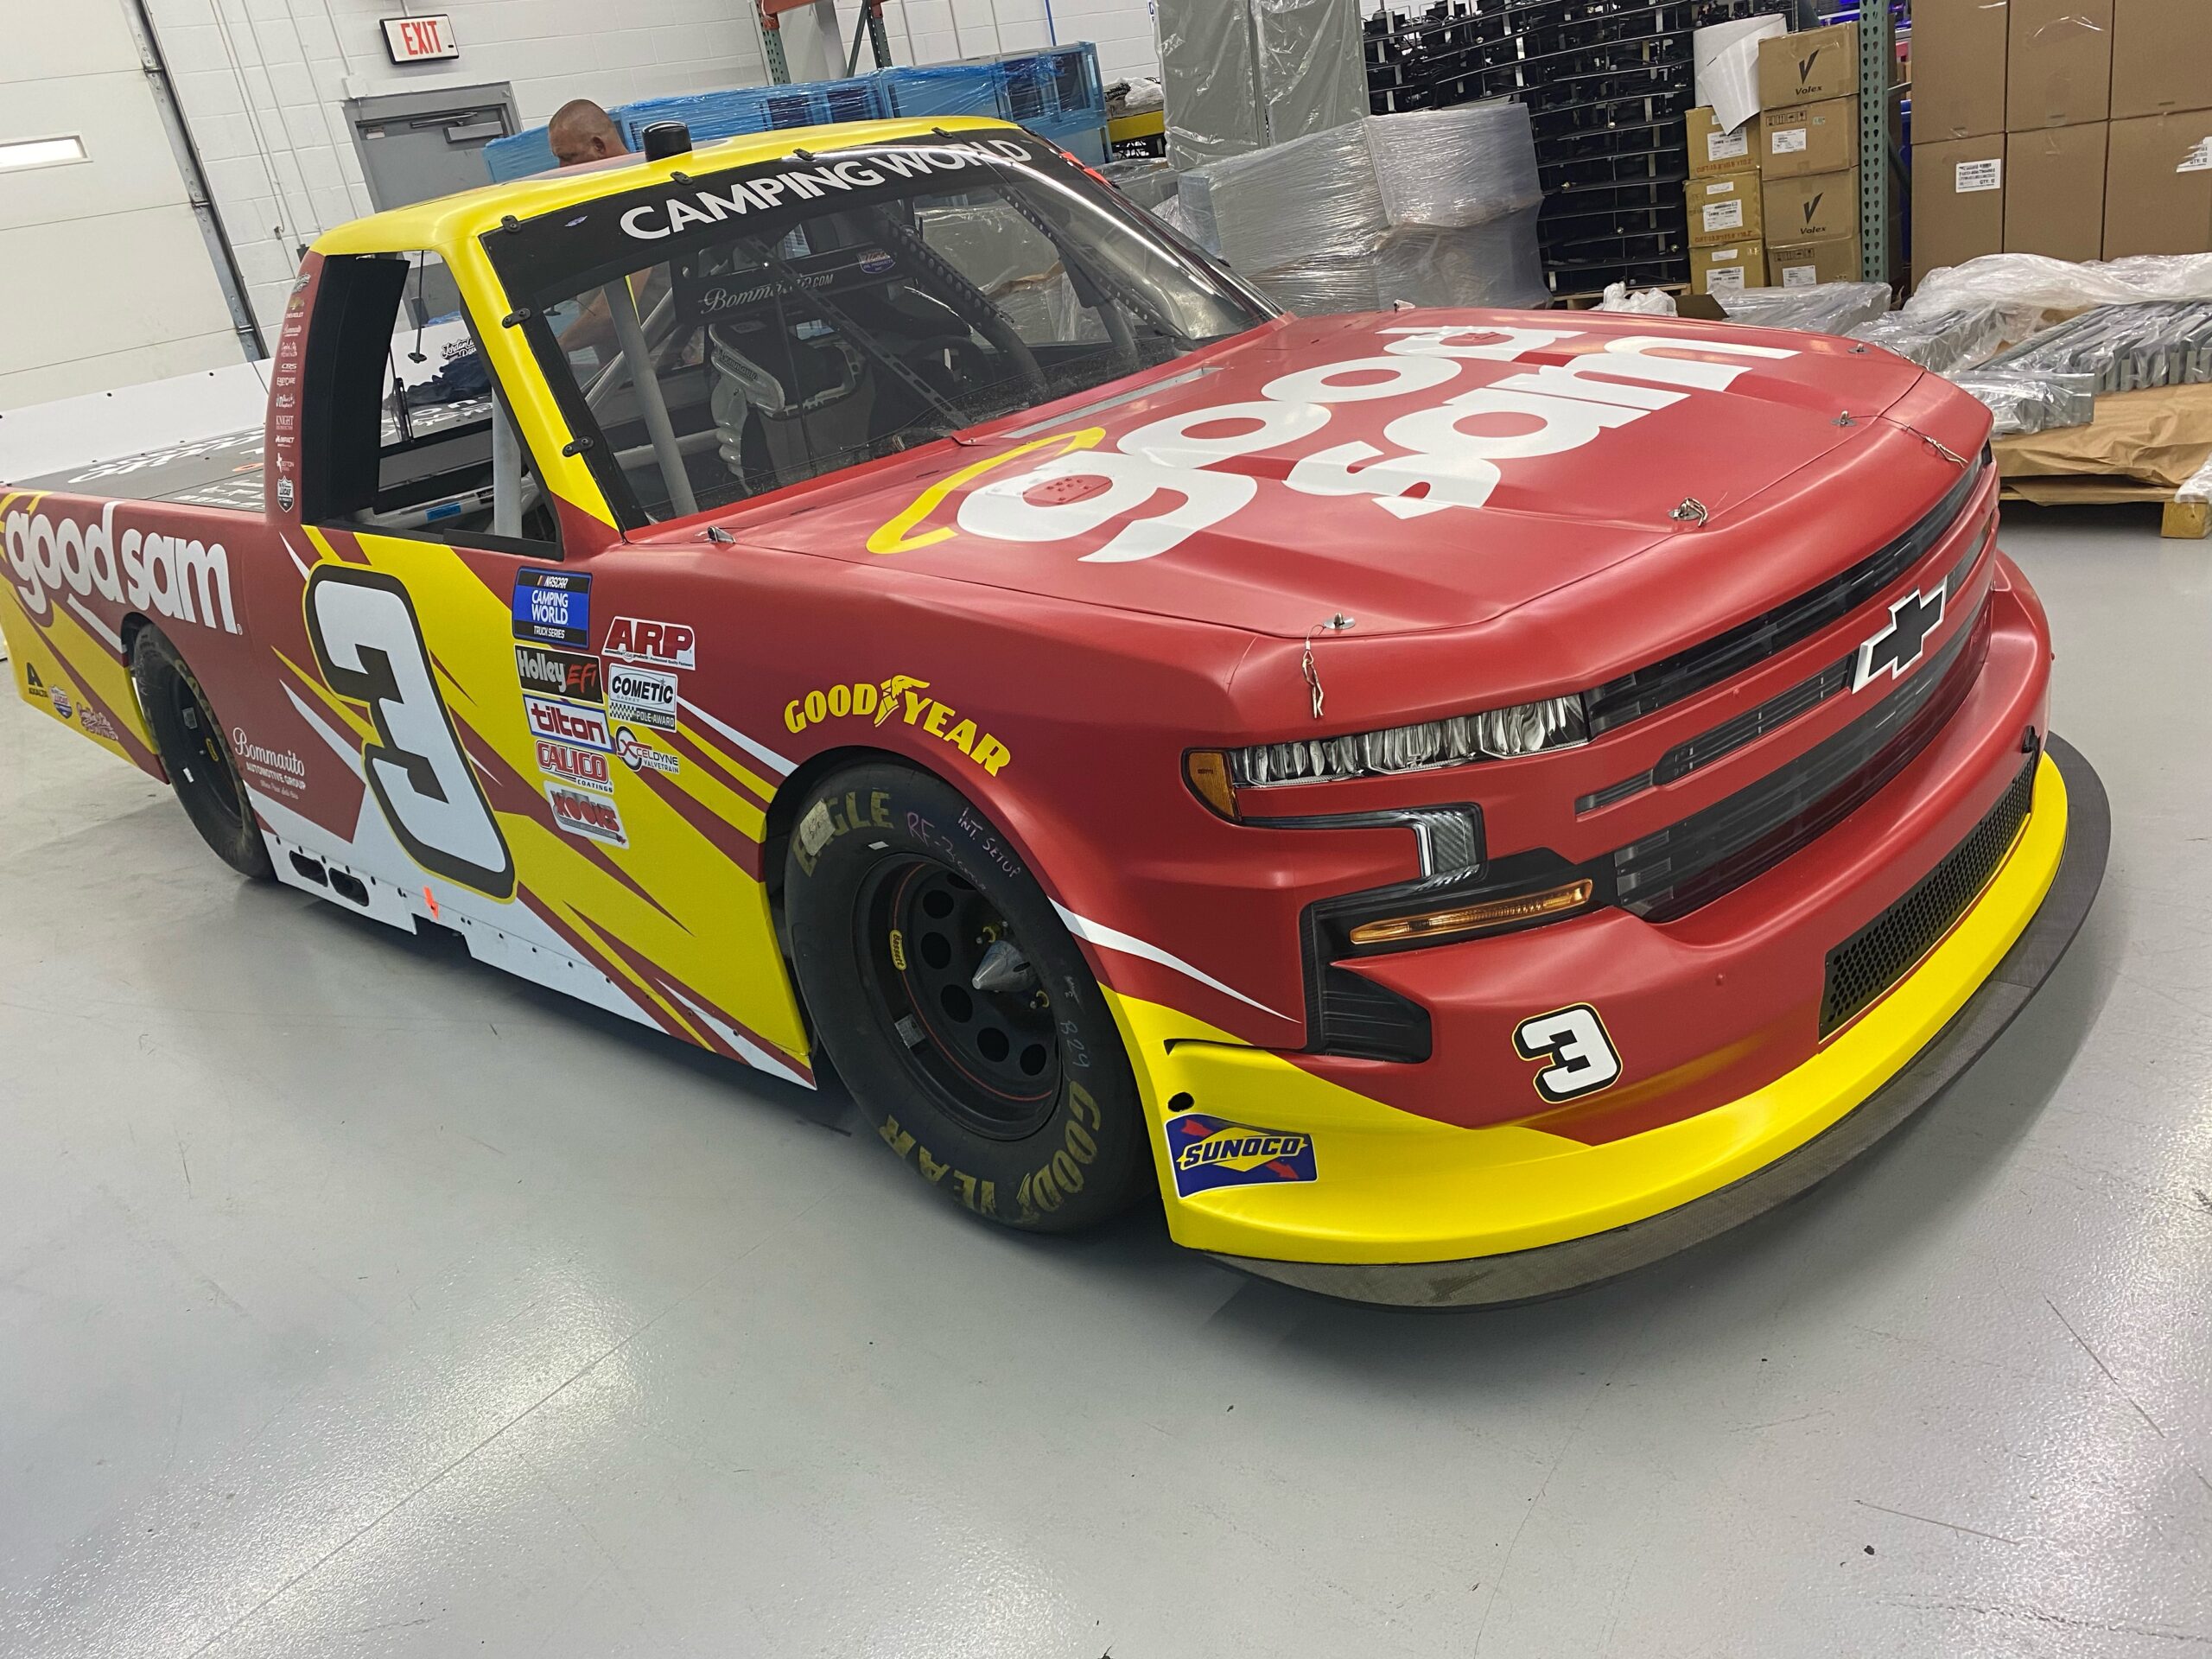 Howie DiSavino III to Make Second NASCAR Camping World Truck Series Start for JAR at Texas Motor Speedway